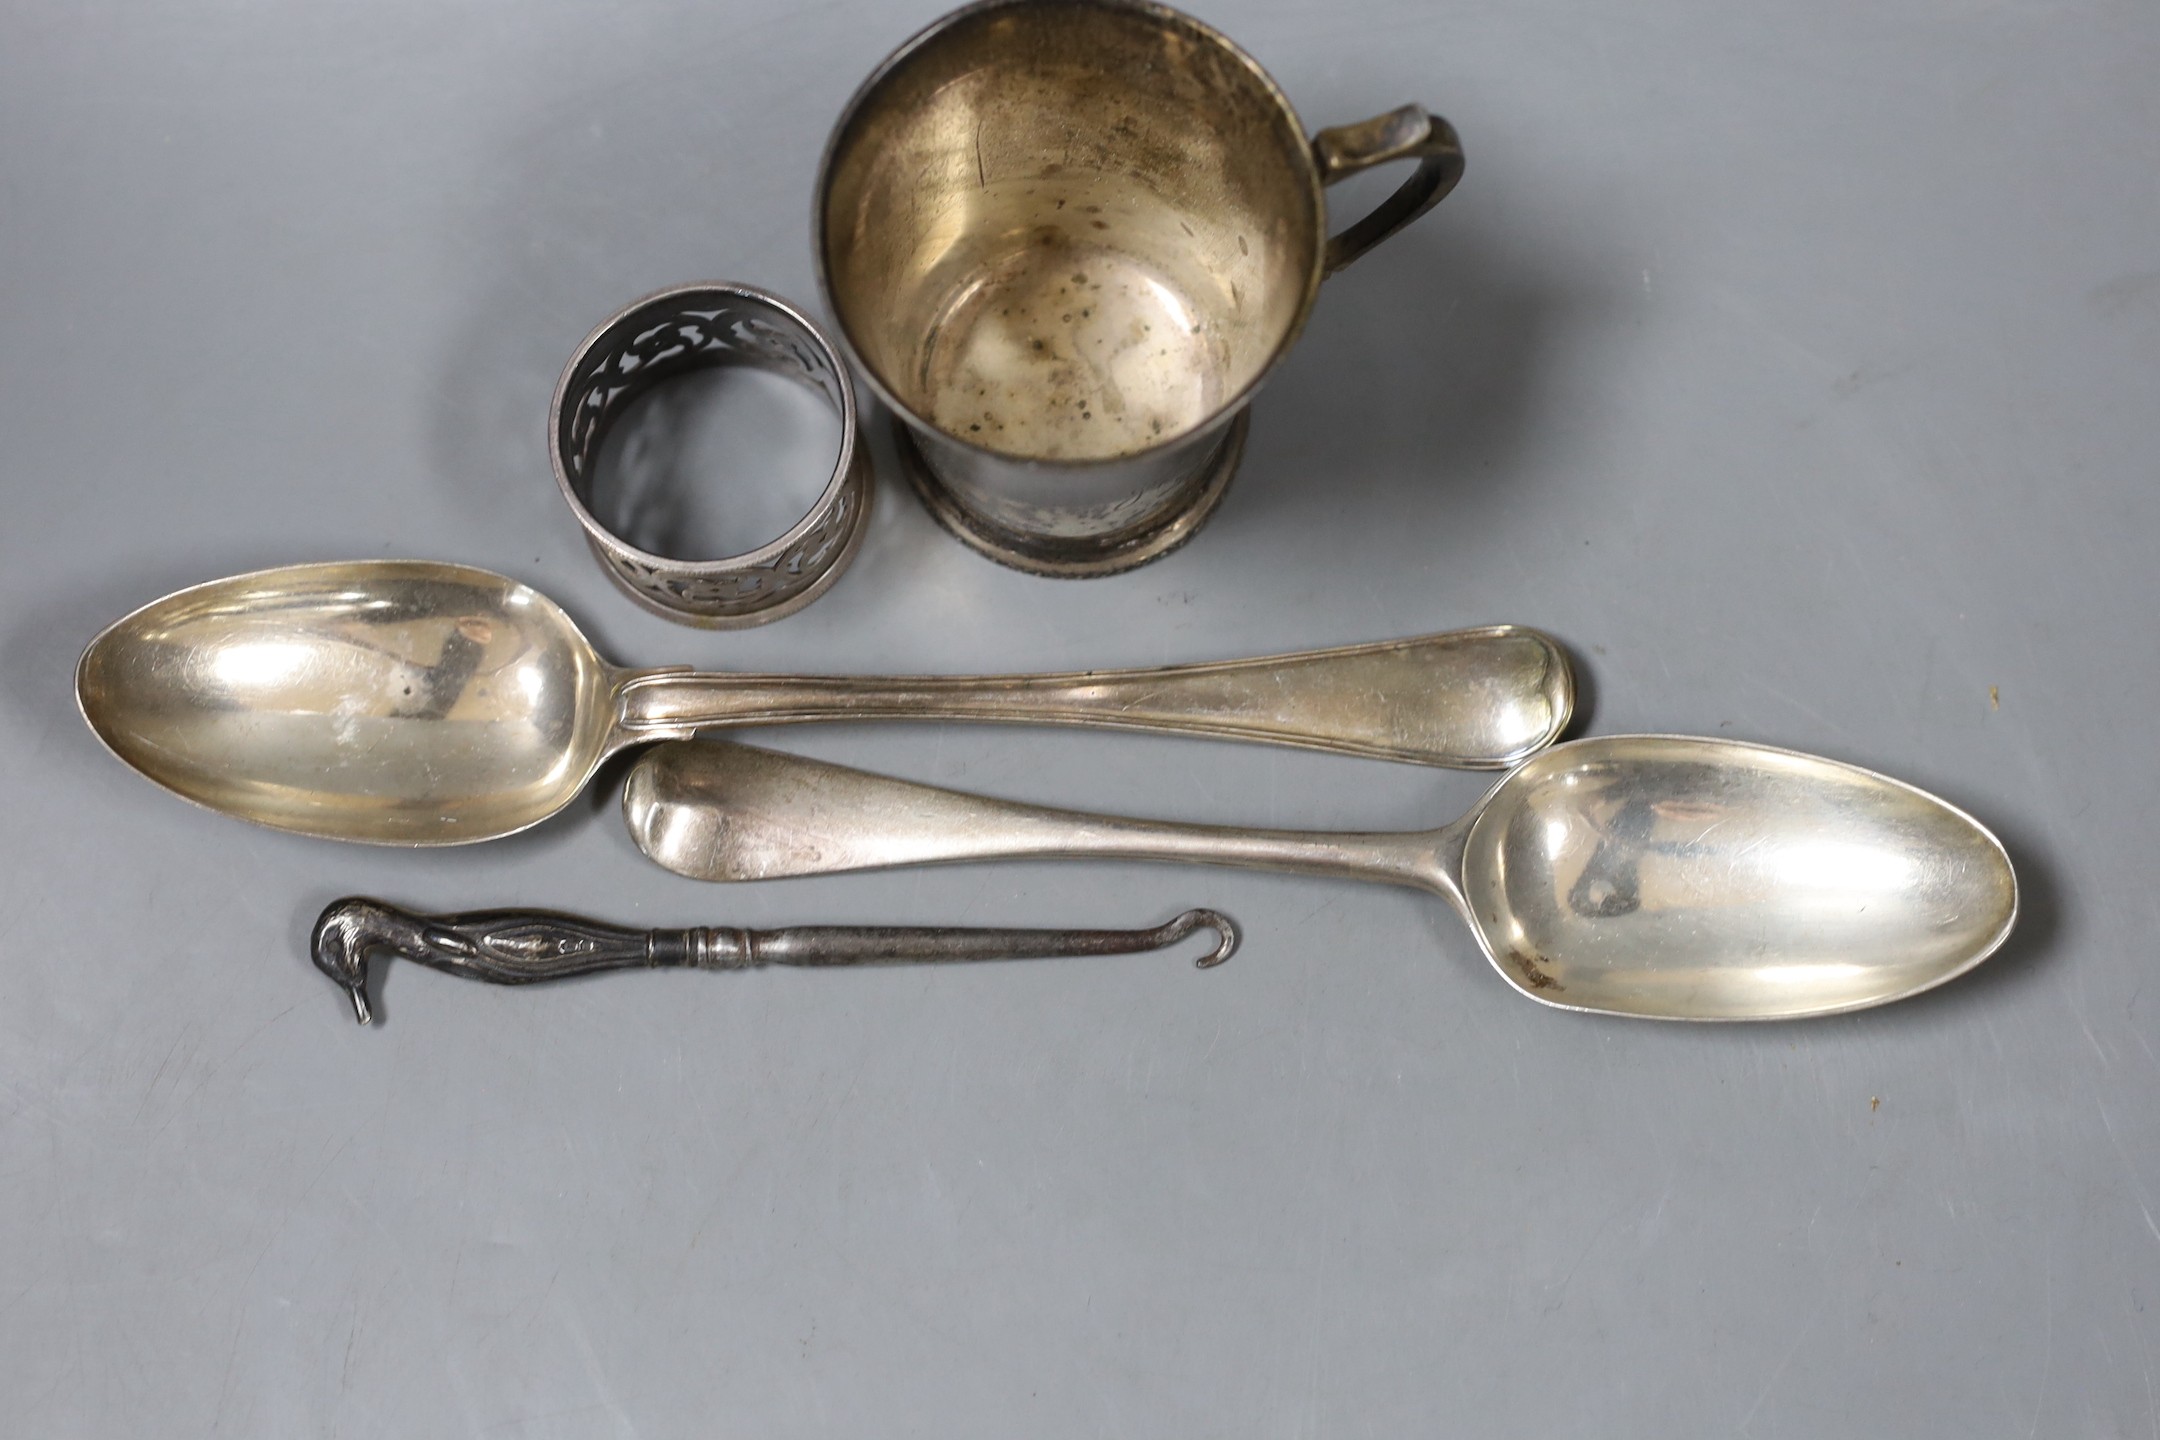 Two 18th century silver spoons, a later silver christening mug, small silver mounted heart shaped photograph frame, a silver napkin ring and a silver handled button hook.